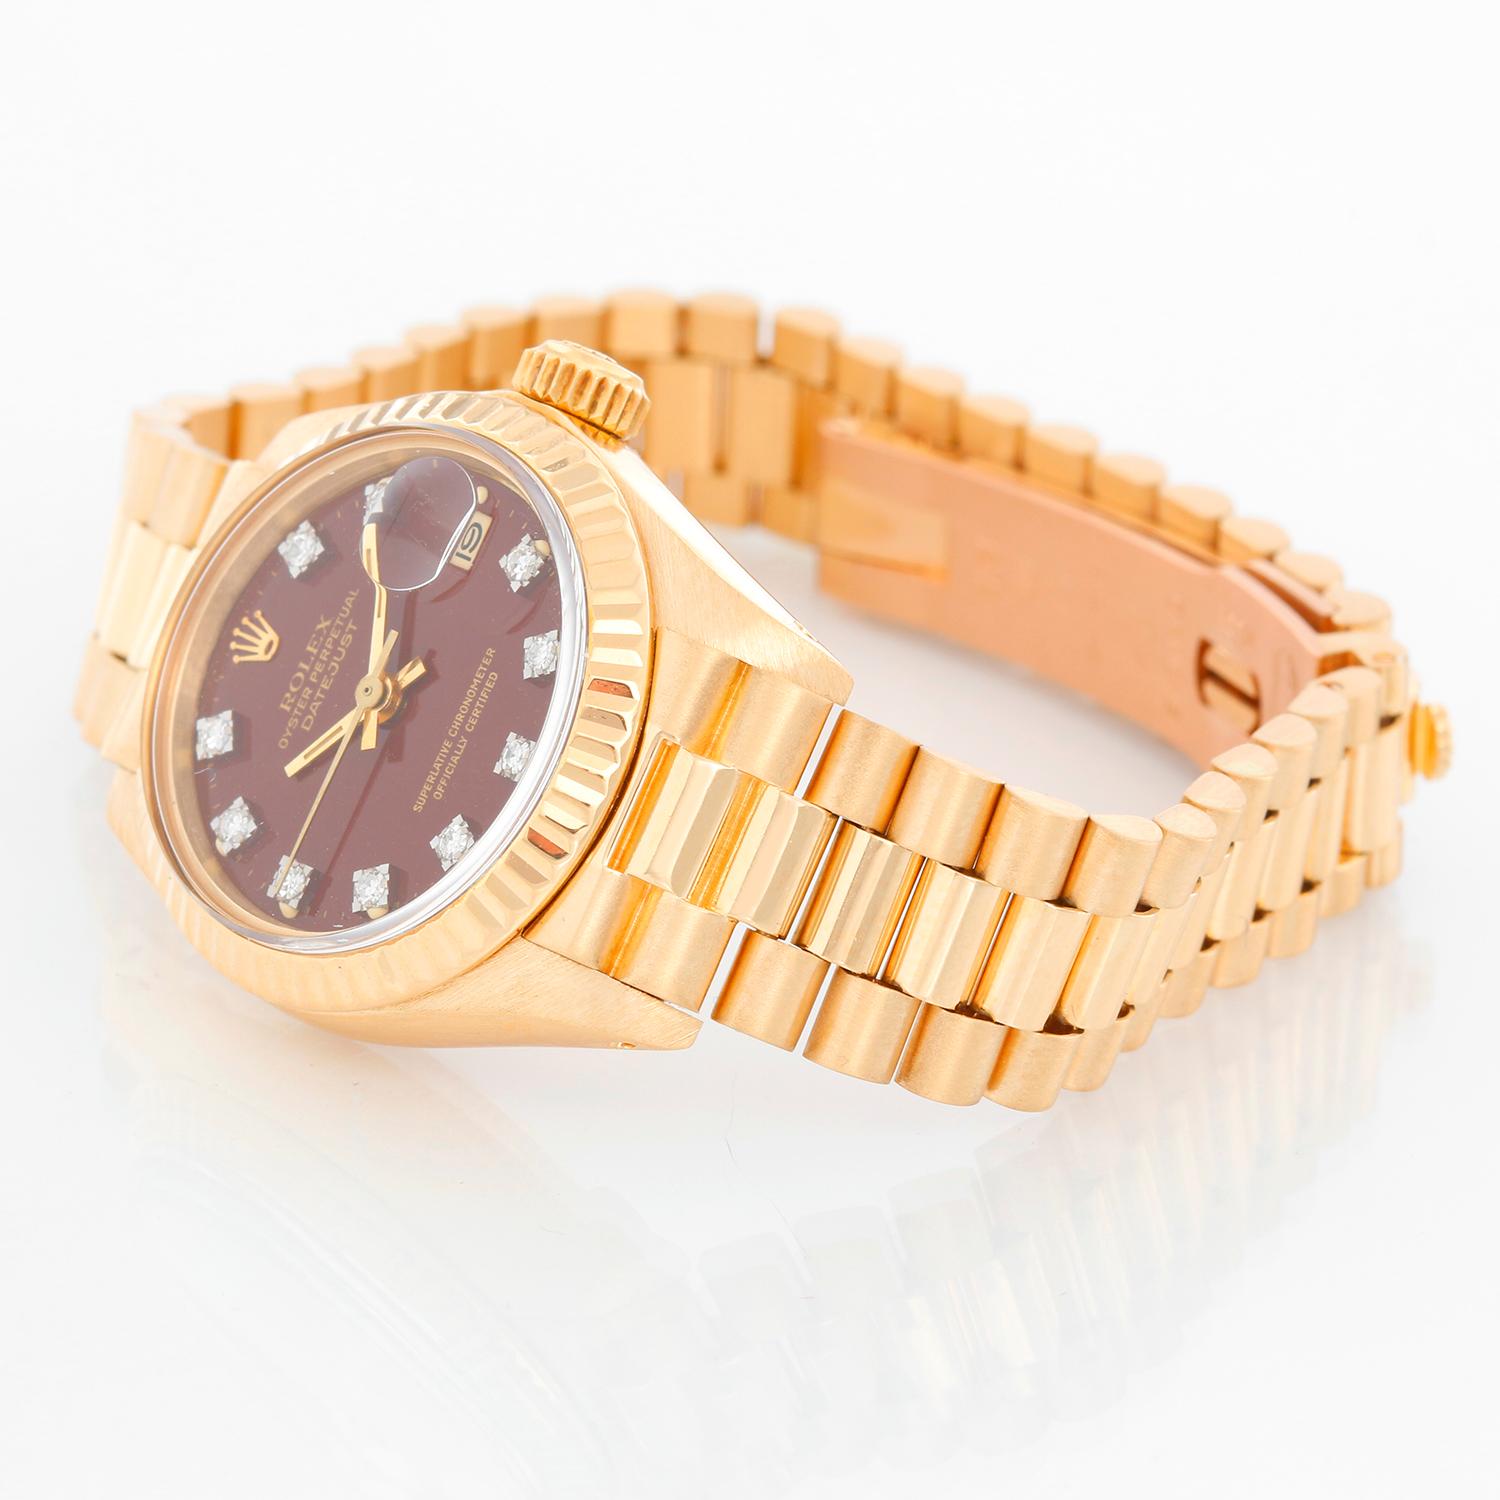 Rolex Ladies President 18K Yellow Gold 6917 Watch - Automatic winding, acrylic crystal. 18k yellow gold case with fluted bezel (26mm diameter). Factory brown Stella diamond dial . 18K yellow gold president bracelet. Pre-owned with custom box.